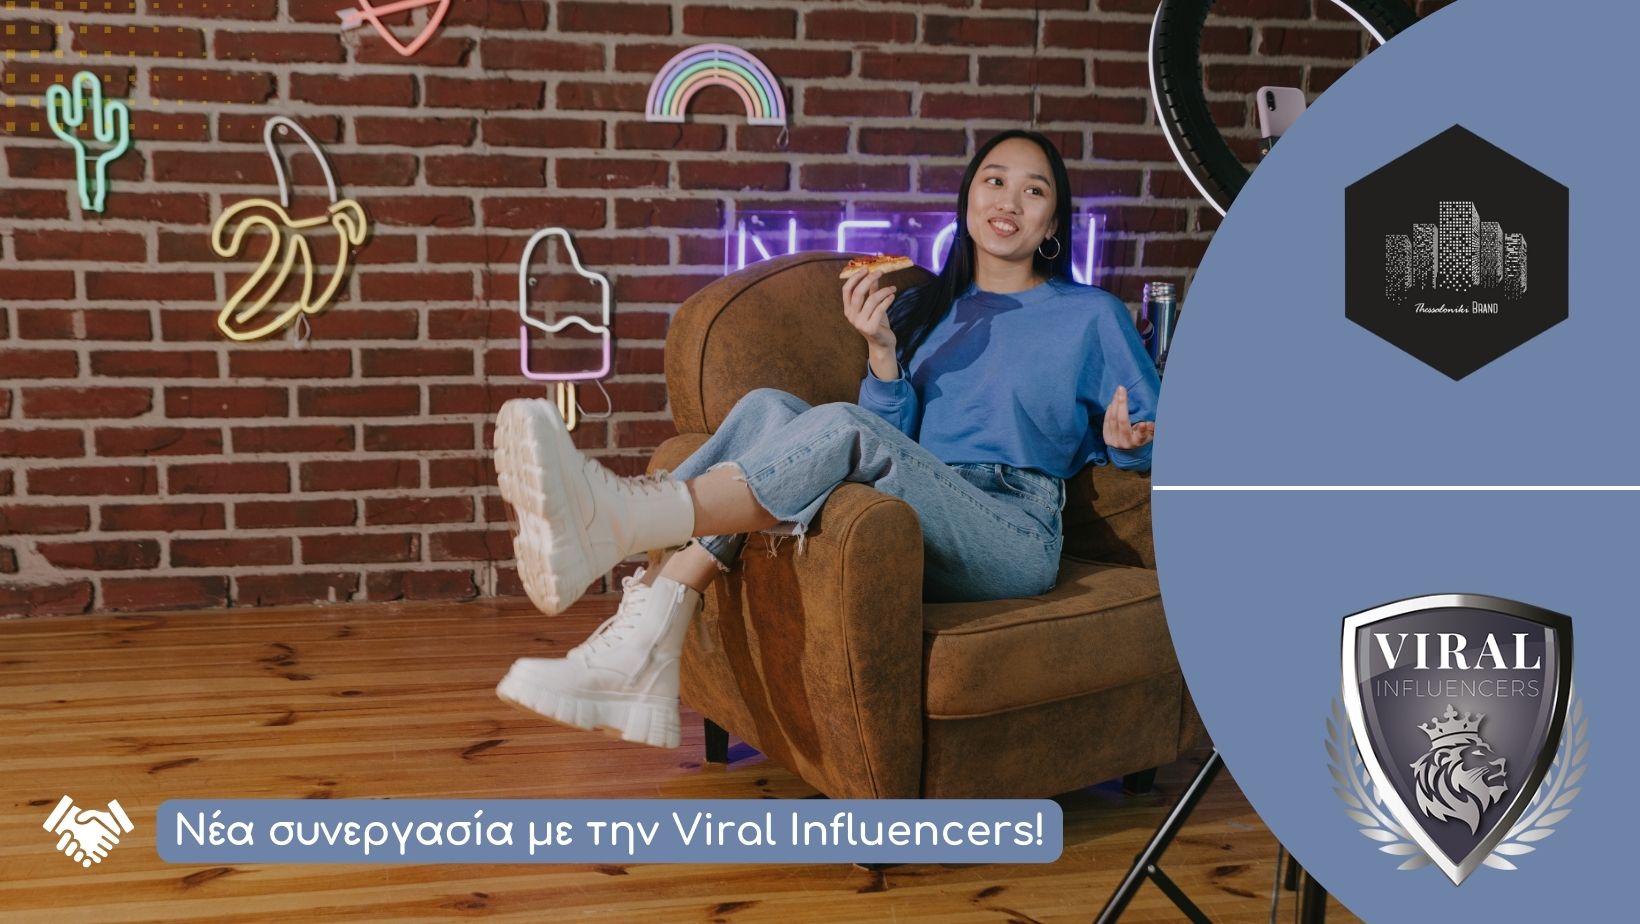 Read more about the article Νέα συνεργασία της Thessaloniki Brand με την Viral Influencers!